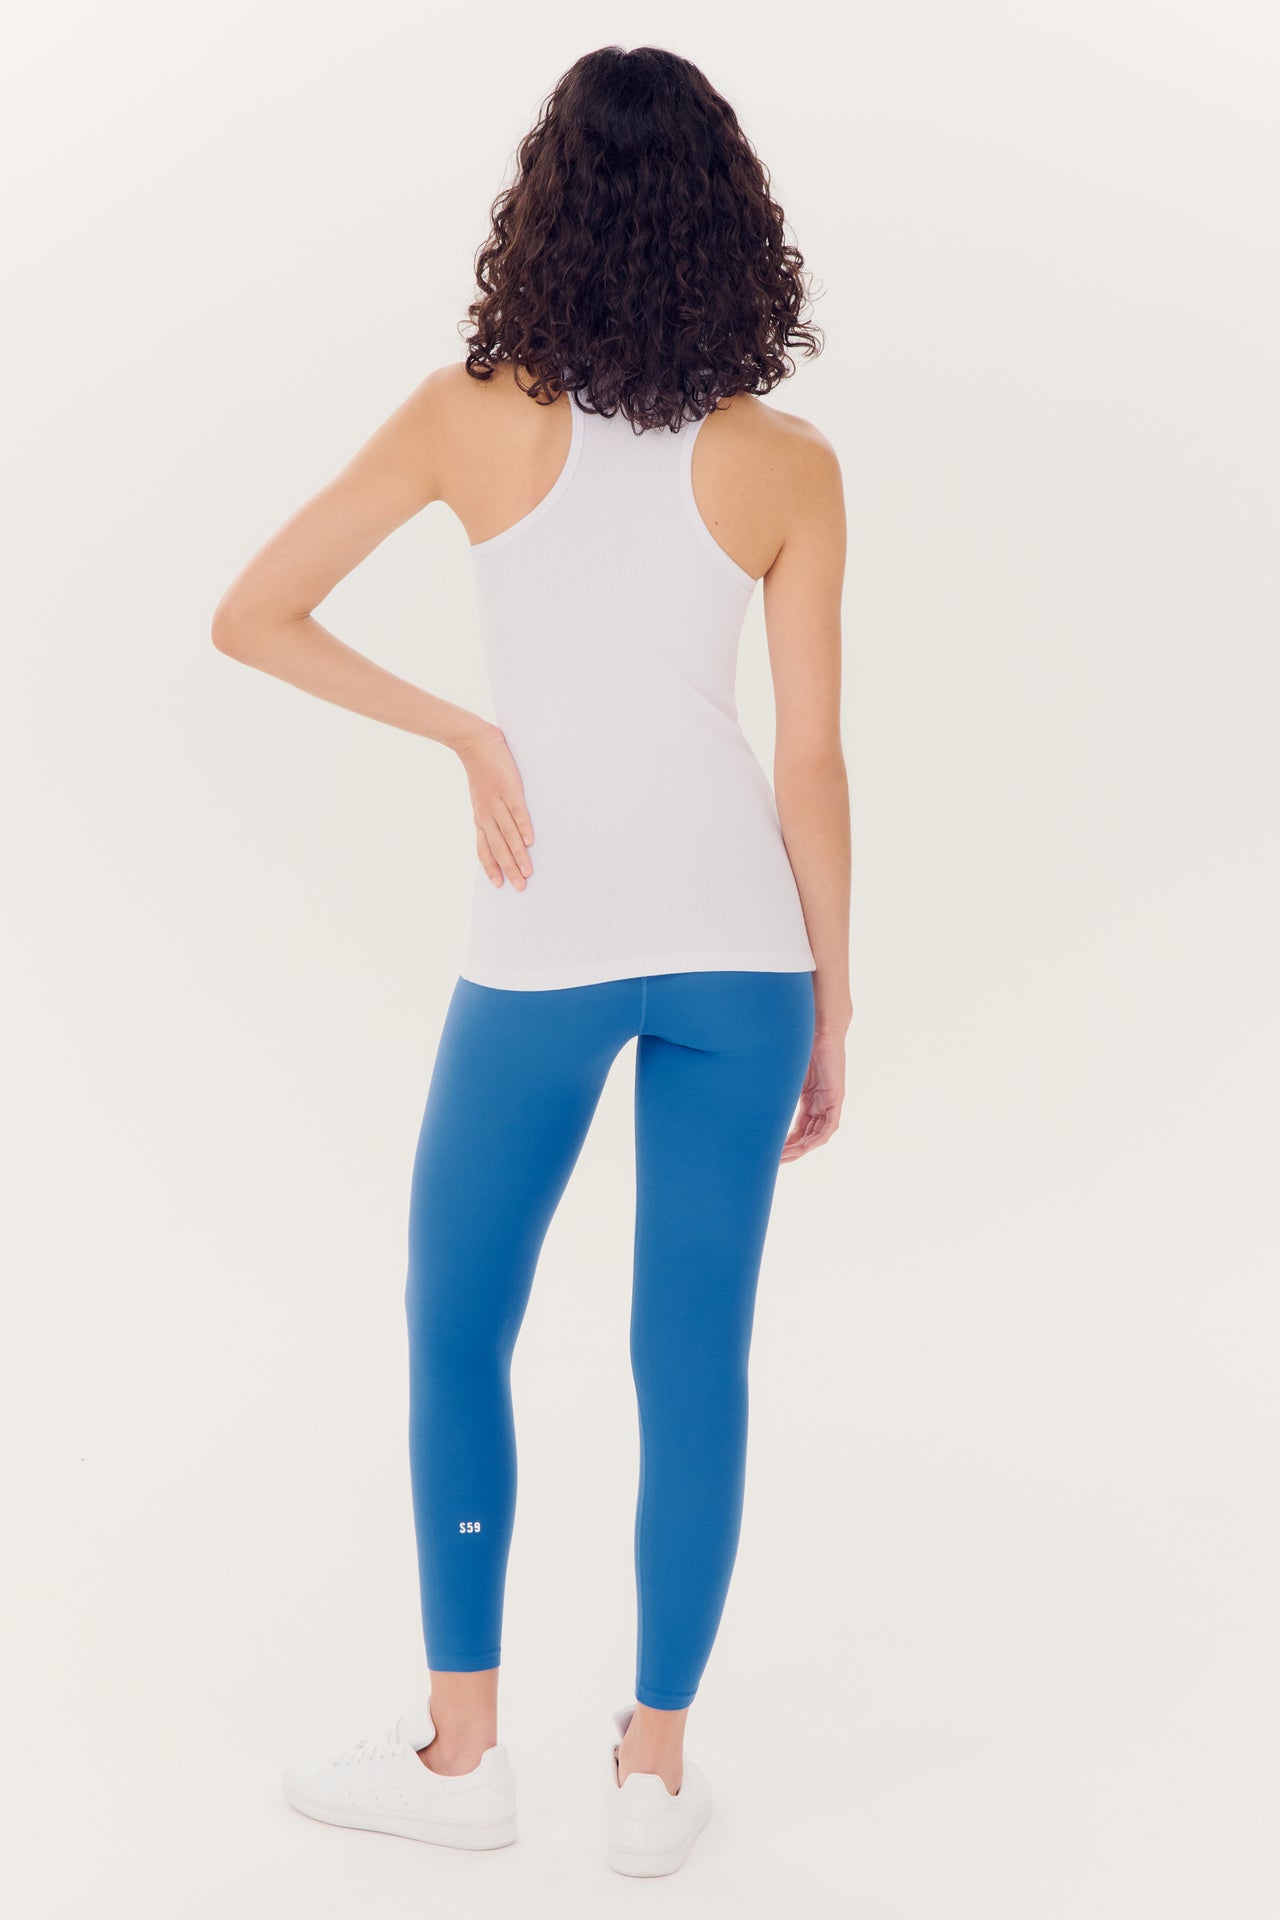 Woman wearing white tank top and SPLITS59 Airweight High Waist Legging - Stone Blue leggings standing with her back to the camera.